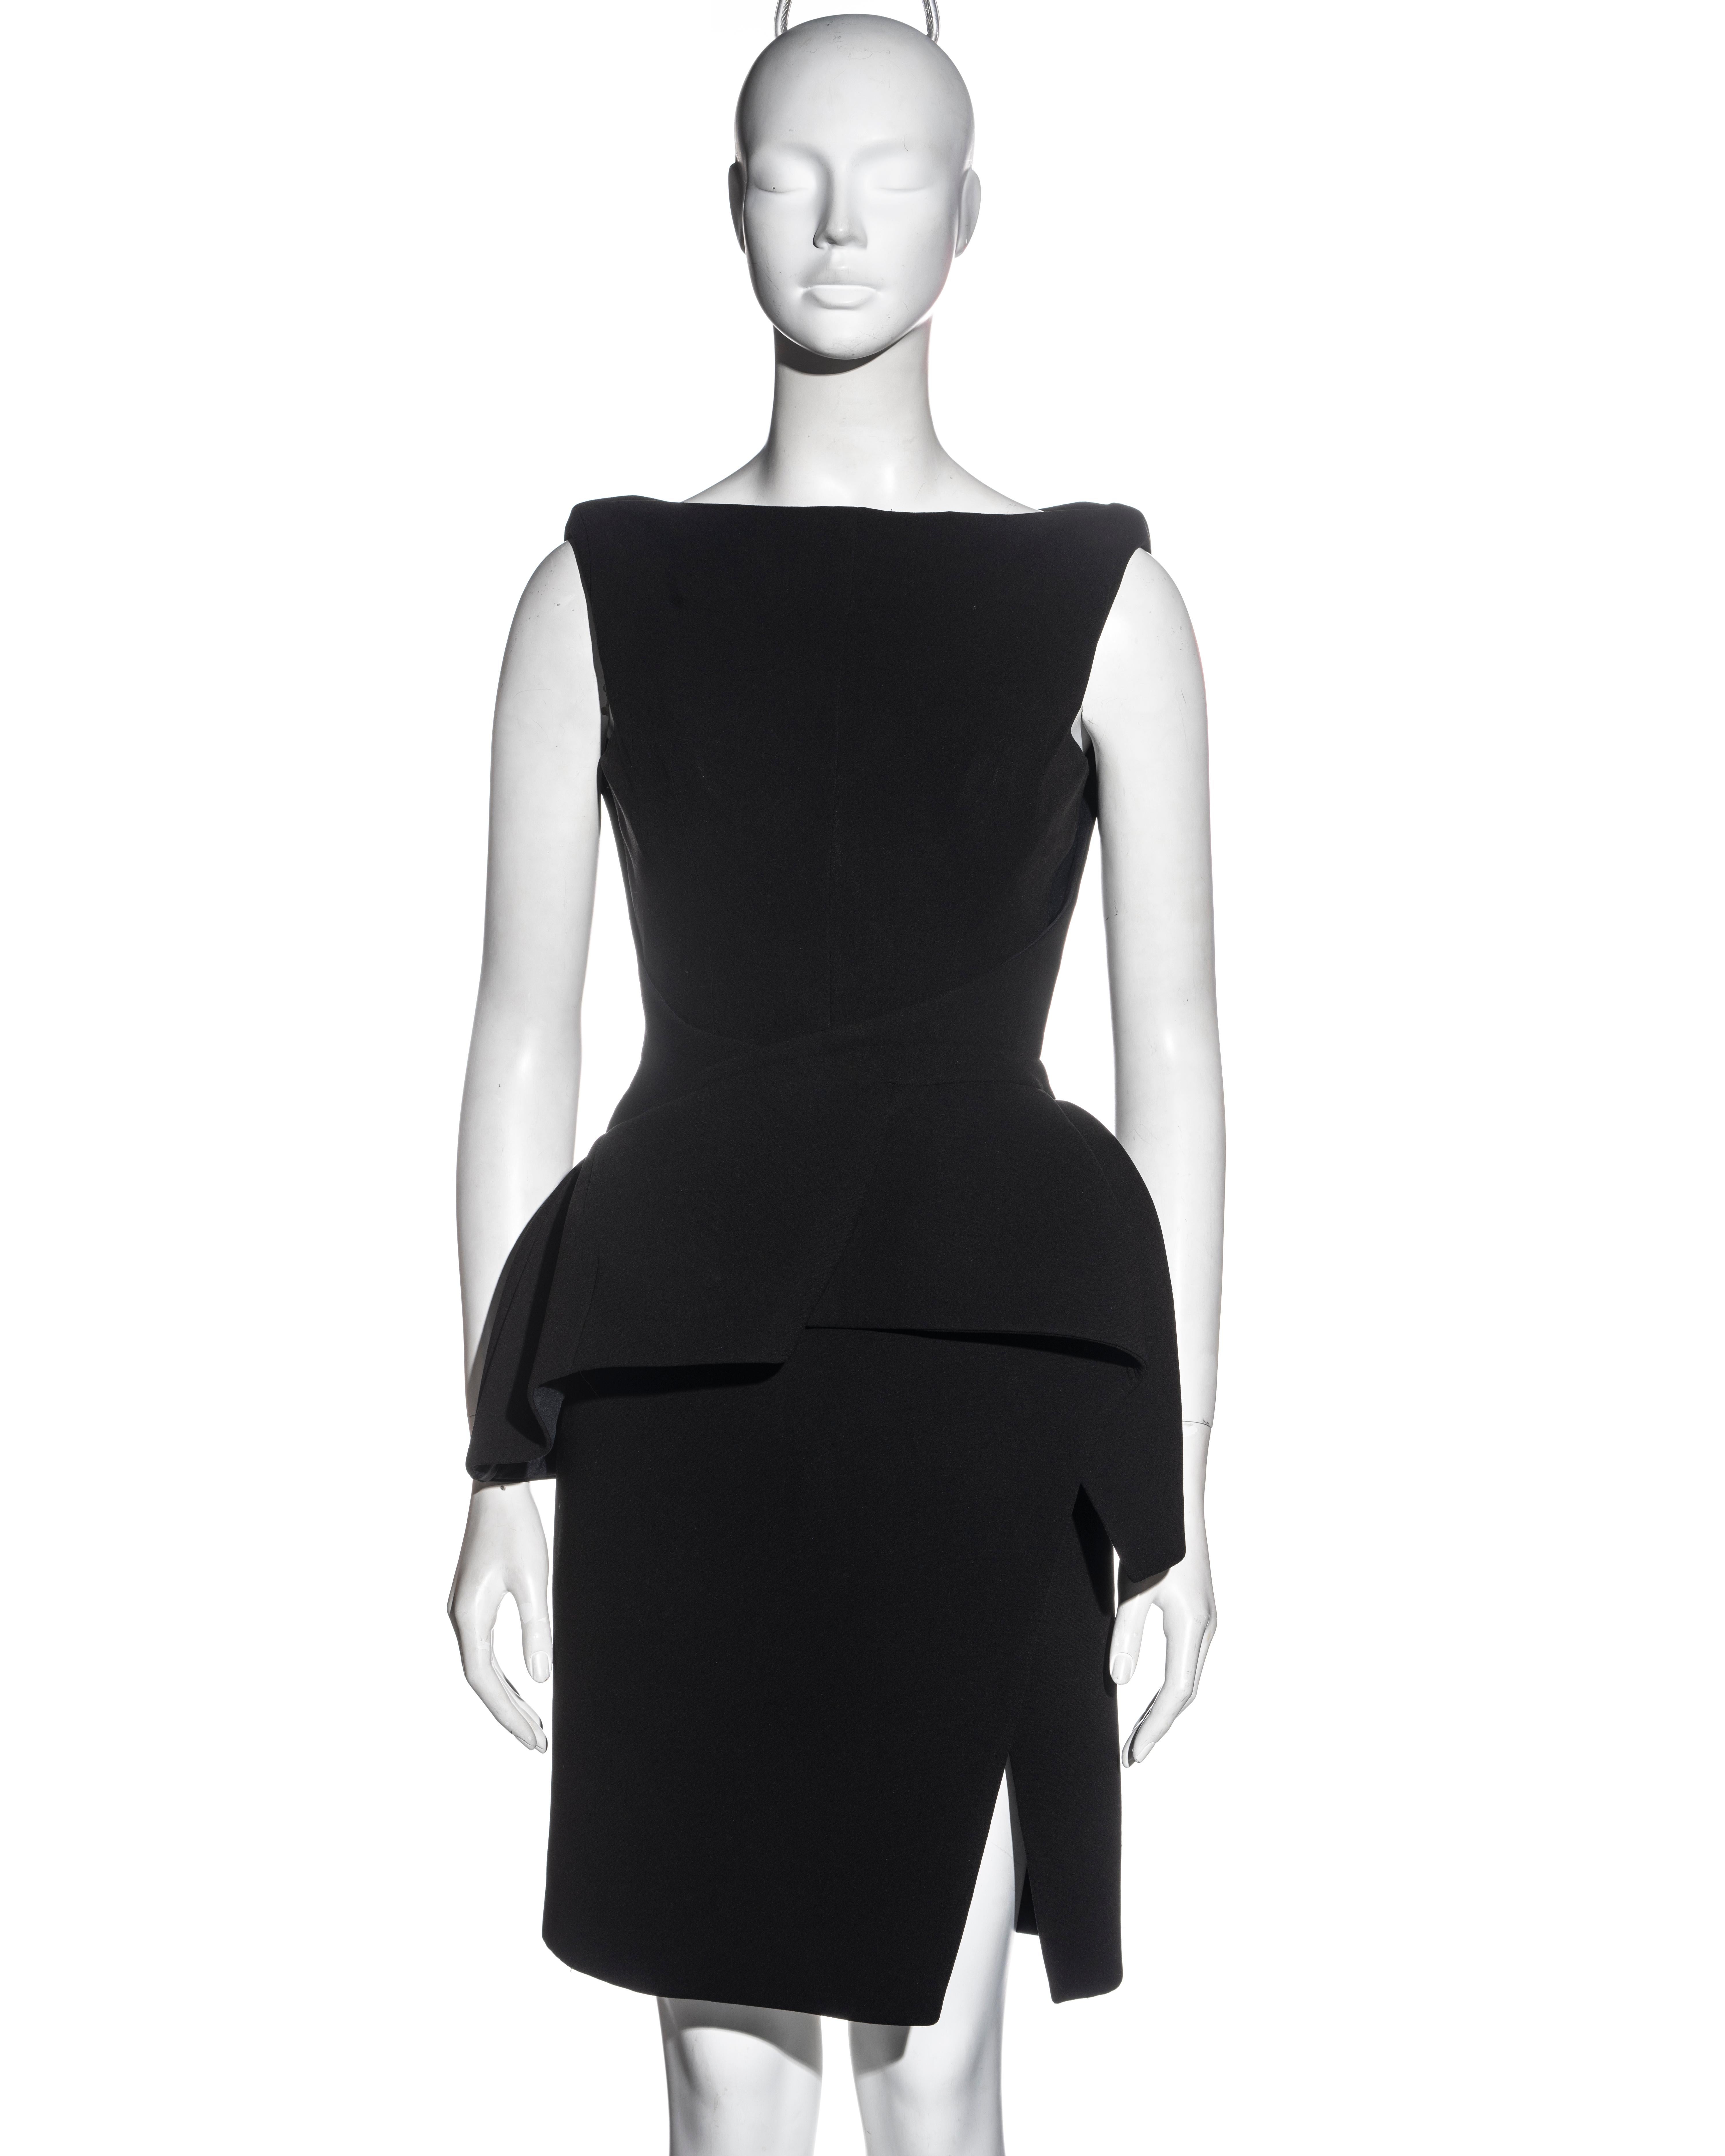 ▪ Balenciaga black structured cocktail dress
▪ Designed by Nicolas Ghesquière
▪ Asymmetric draped peplum
▪ Slit skirt 
▪ Corseted bodice
▪ Padded shoulders 
▪ FR 38 - UK 10 - US 6
▪ Fall-Winter 2008
▪ Fabric 1: 71% Acetate, 29% Polyester
▪ Fabric 2: